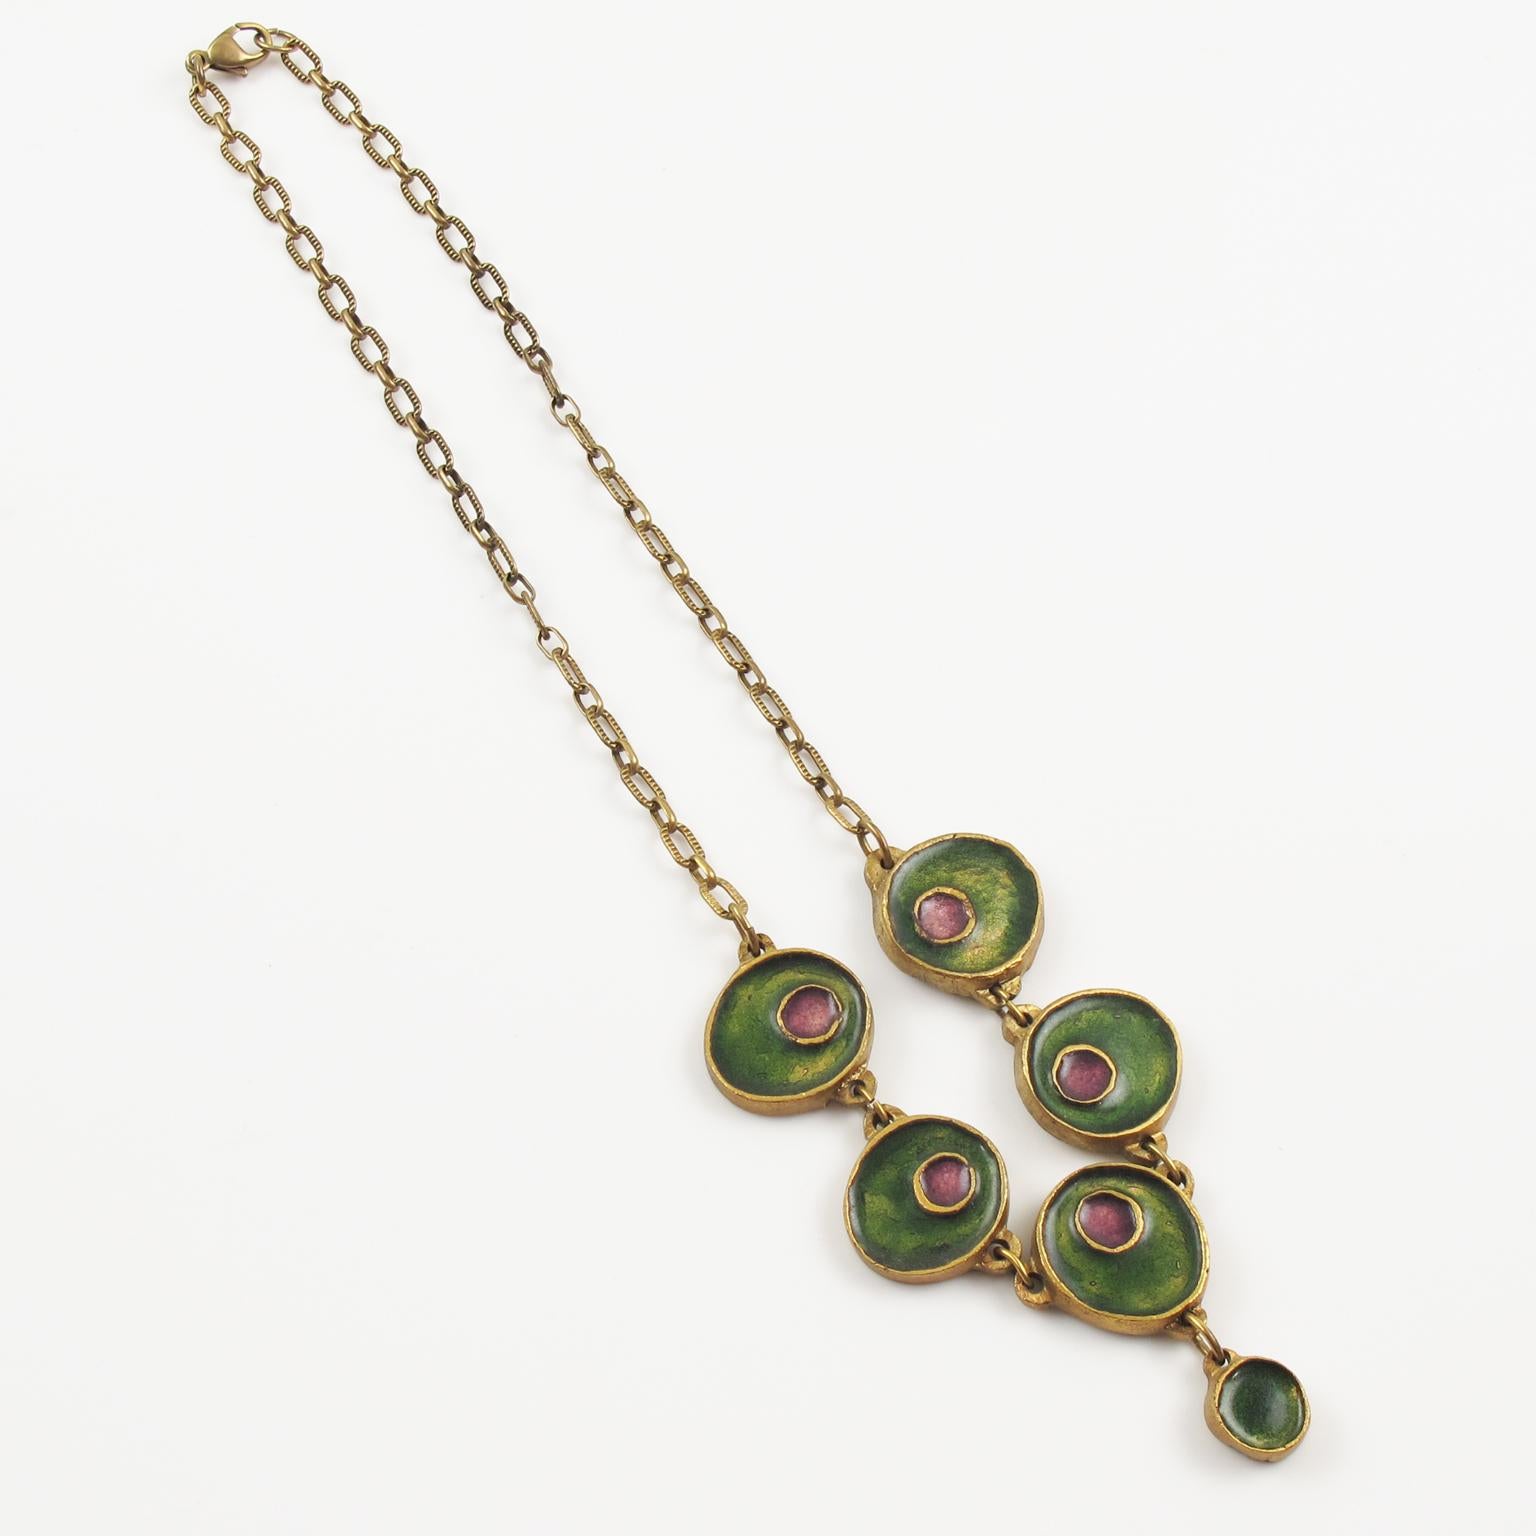 Gilded Bronze Choker Necklace with Green and Purple Enamel In Excellent Condition For Sale In Atlanta, GA